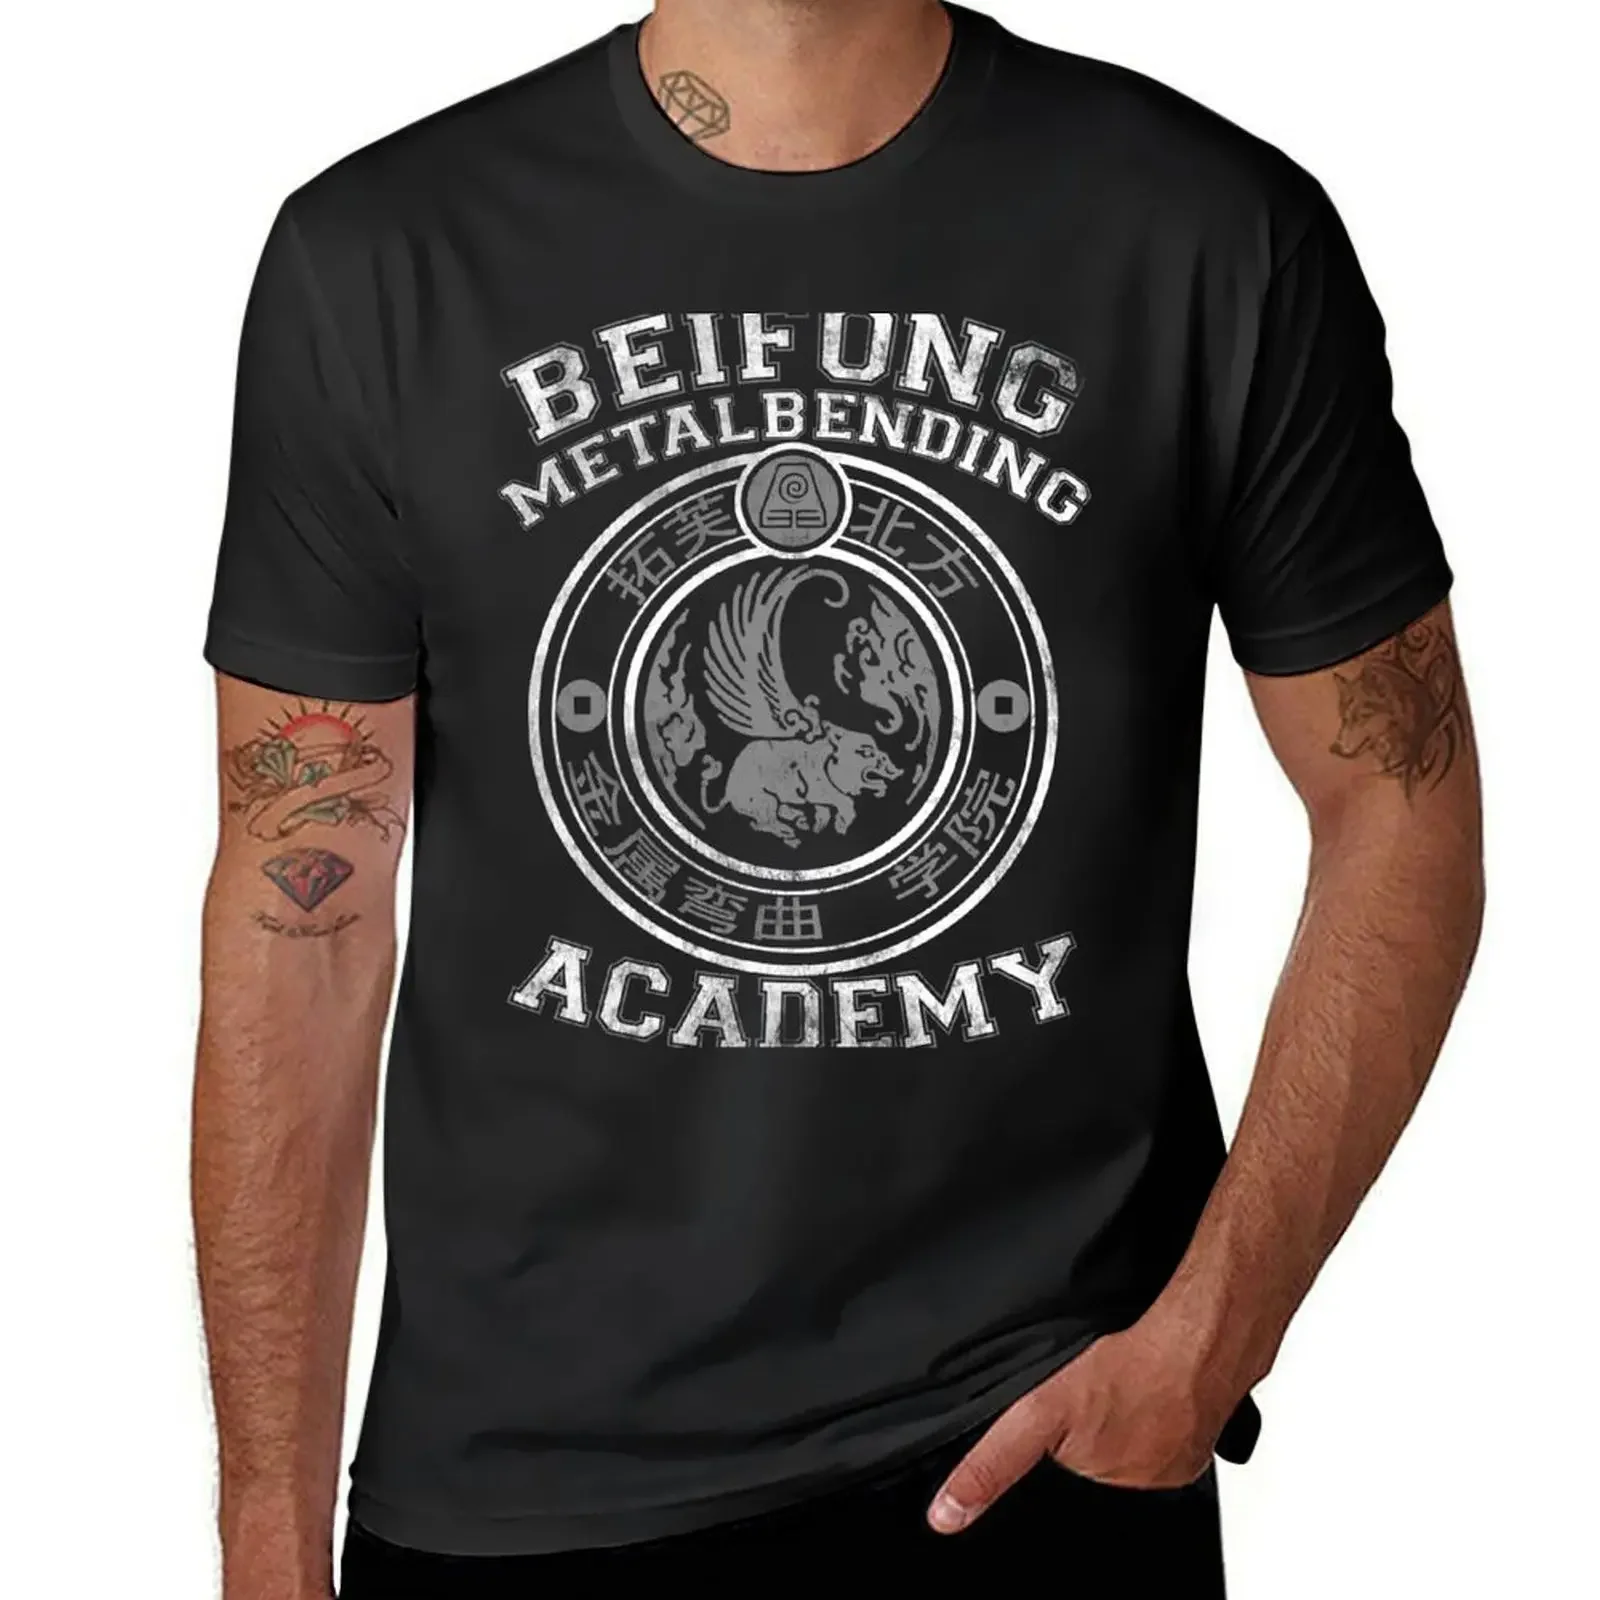 

Beifong Metalbending Academy - White & Silver T-Shirt sublime aesthetic clothes mens t shirts pack